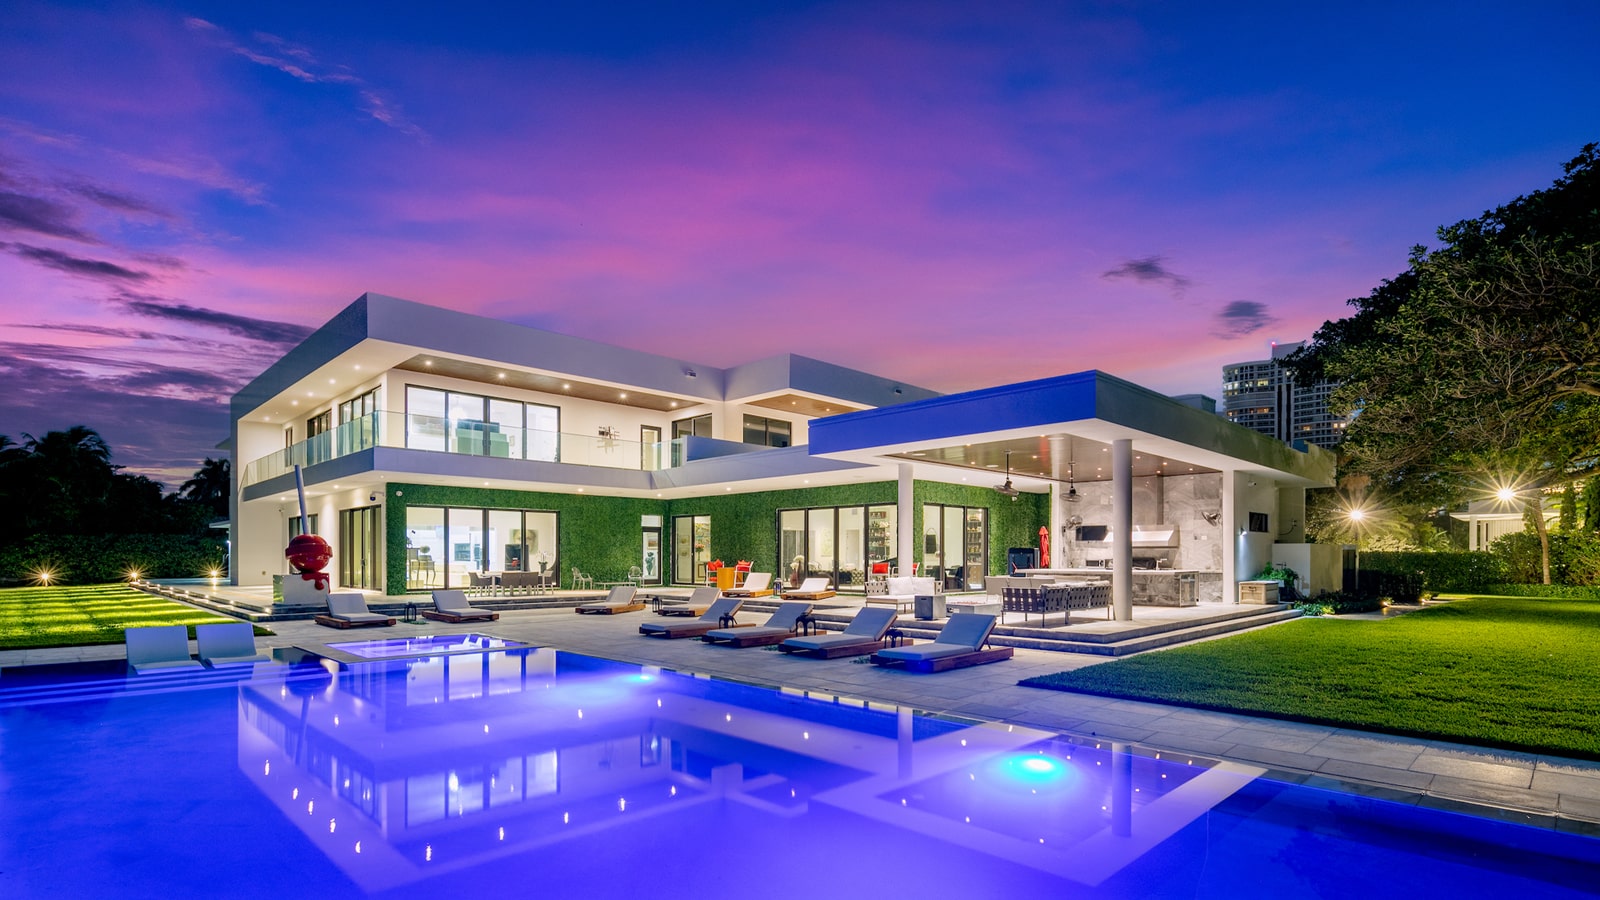 Luxury Home for Sale in South Florida with Pool